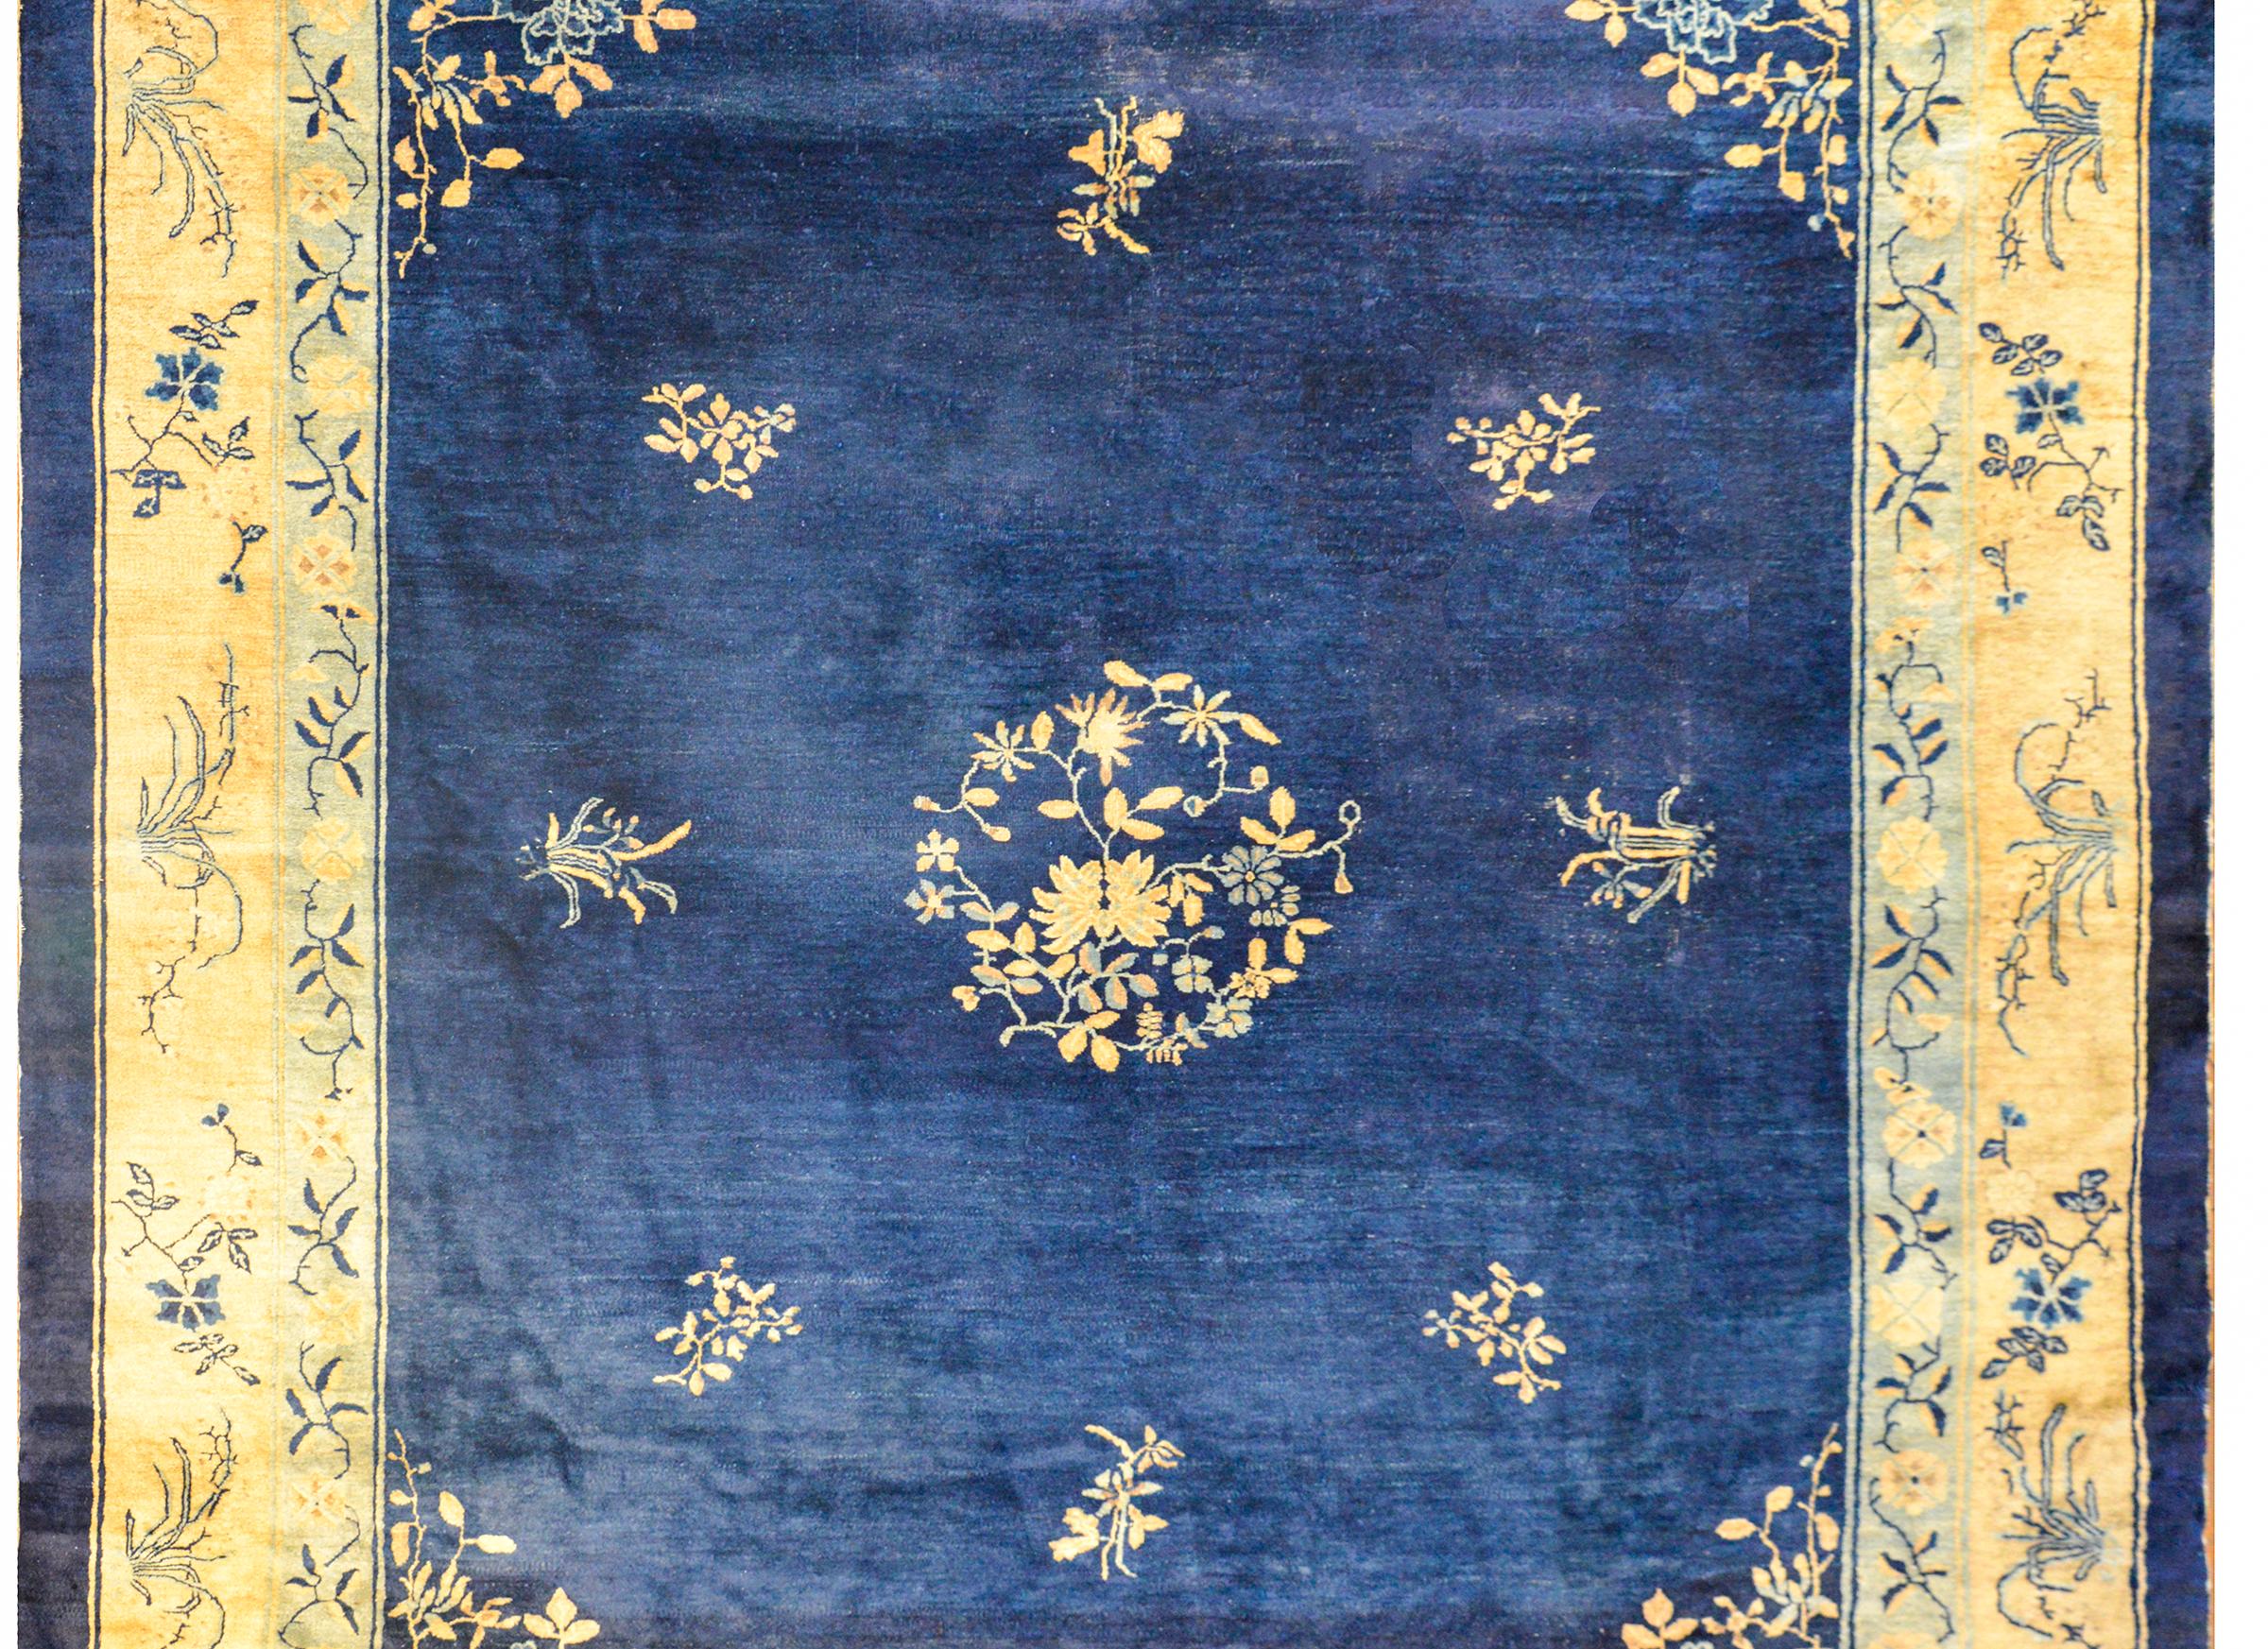 An amazing early 20th century Chinese Peking rug with a central floral medallion amidst a field of additional flowers on a beautiful indigo field, surrounded by a wide cream colored and pale indigo colored borders with pairs of goldfish in each